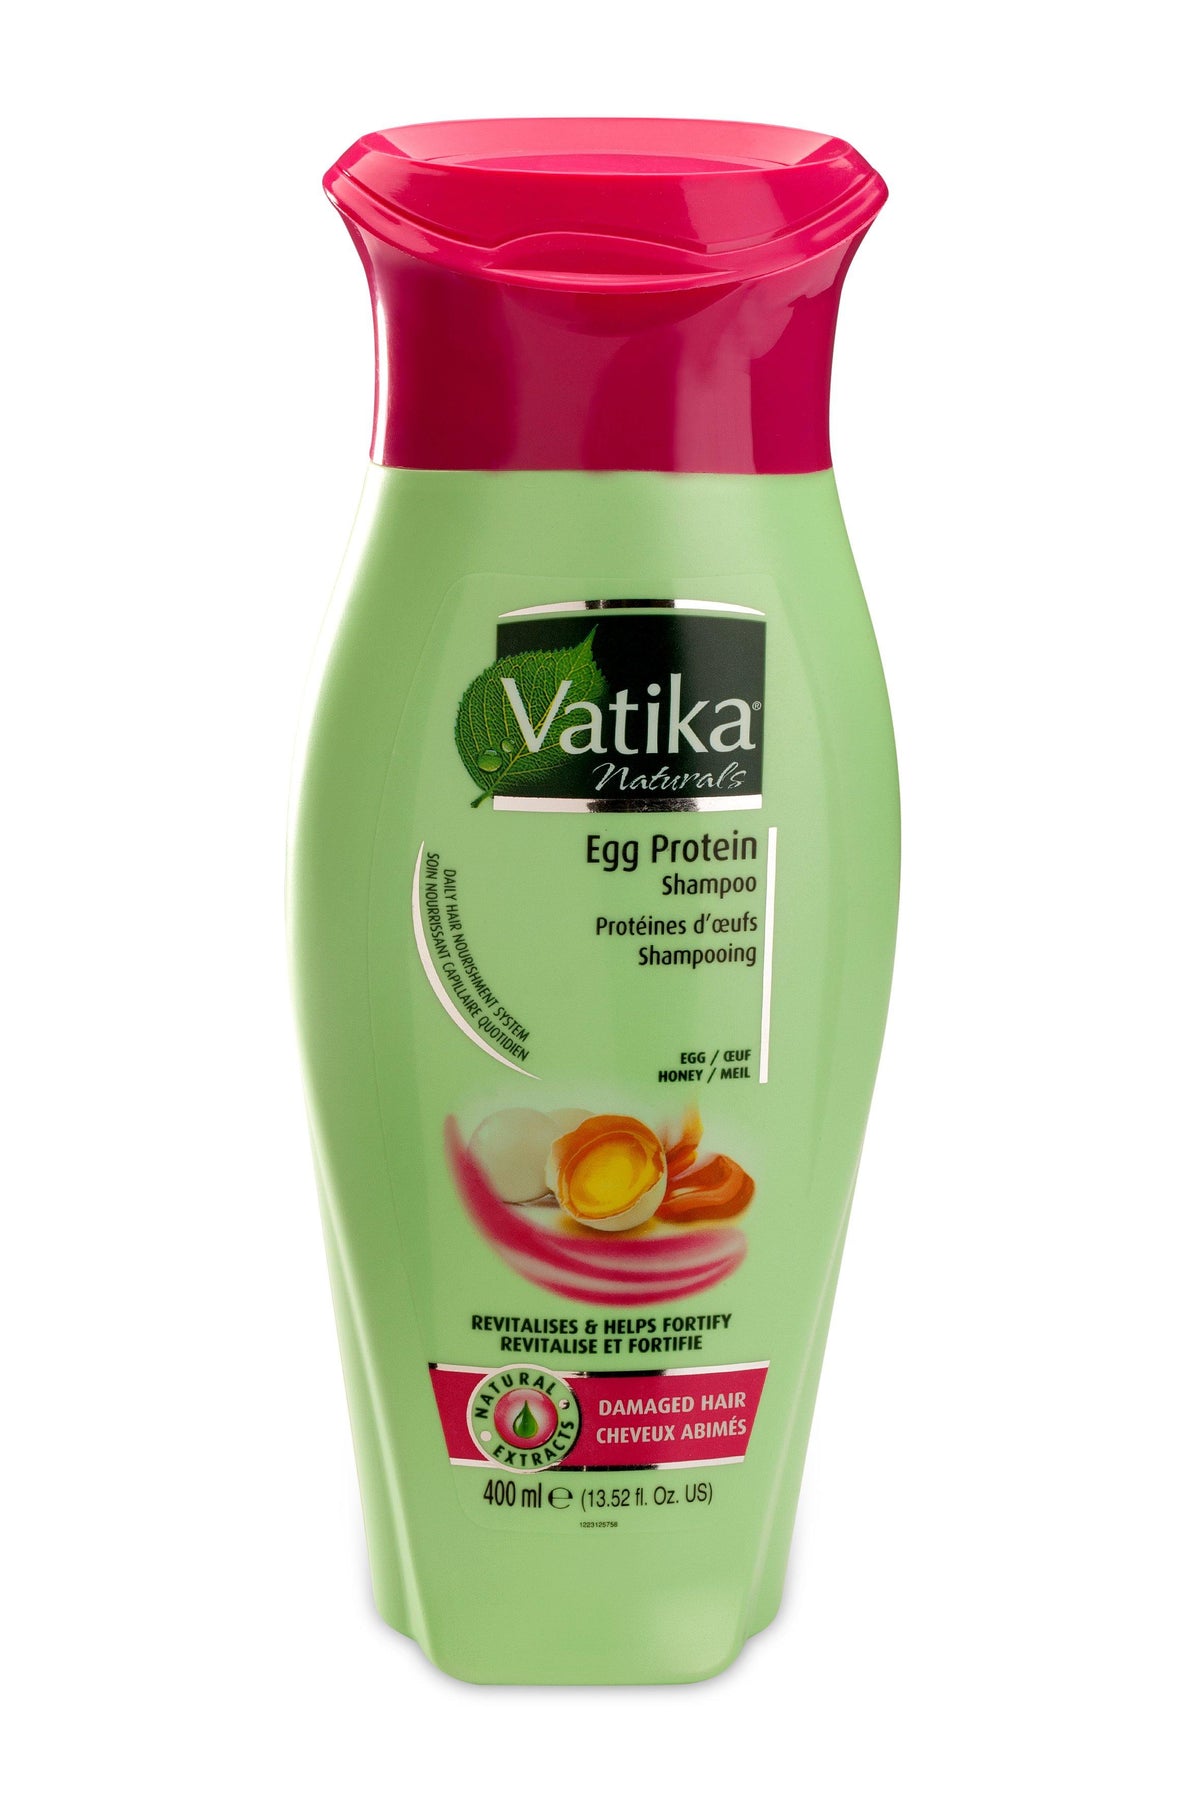 Vatika Naturals Egg Protein Shampoo 400Ml - Cartly - Indian Grocery Store